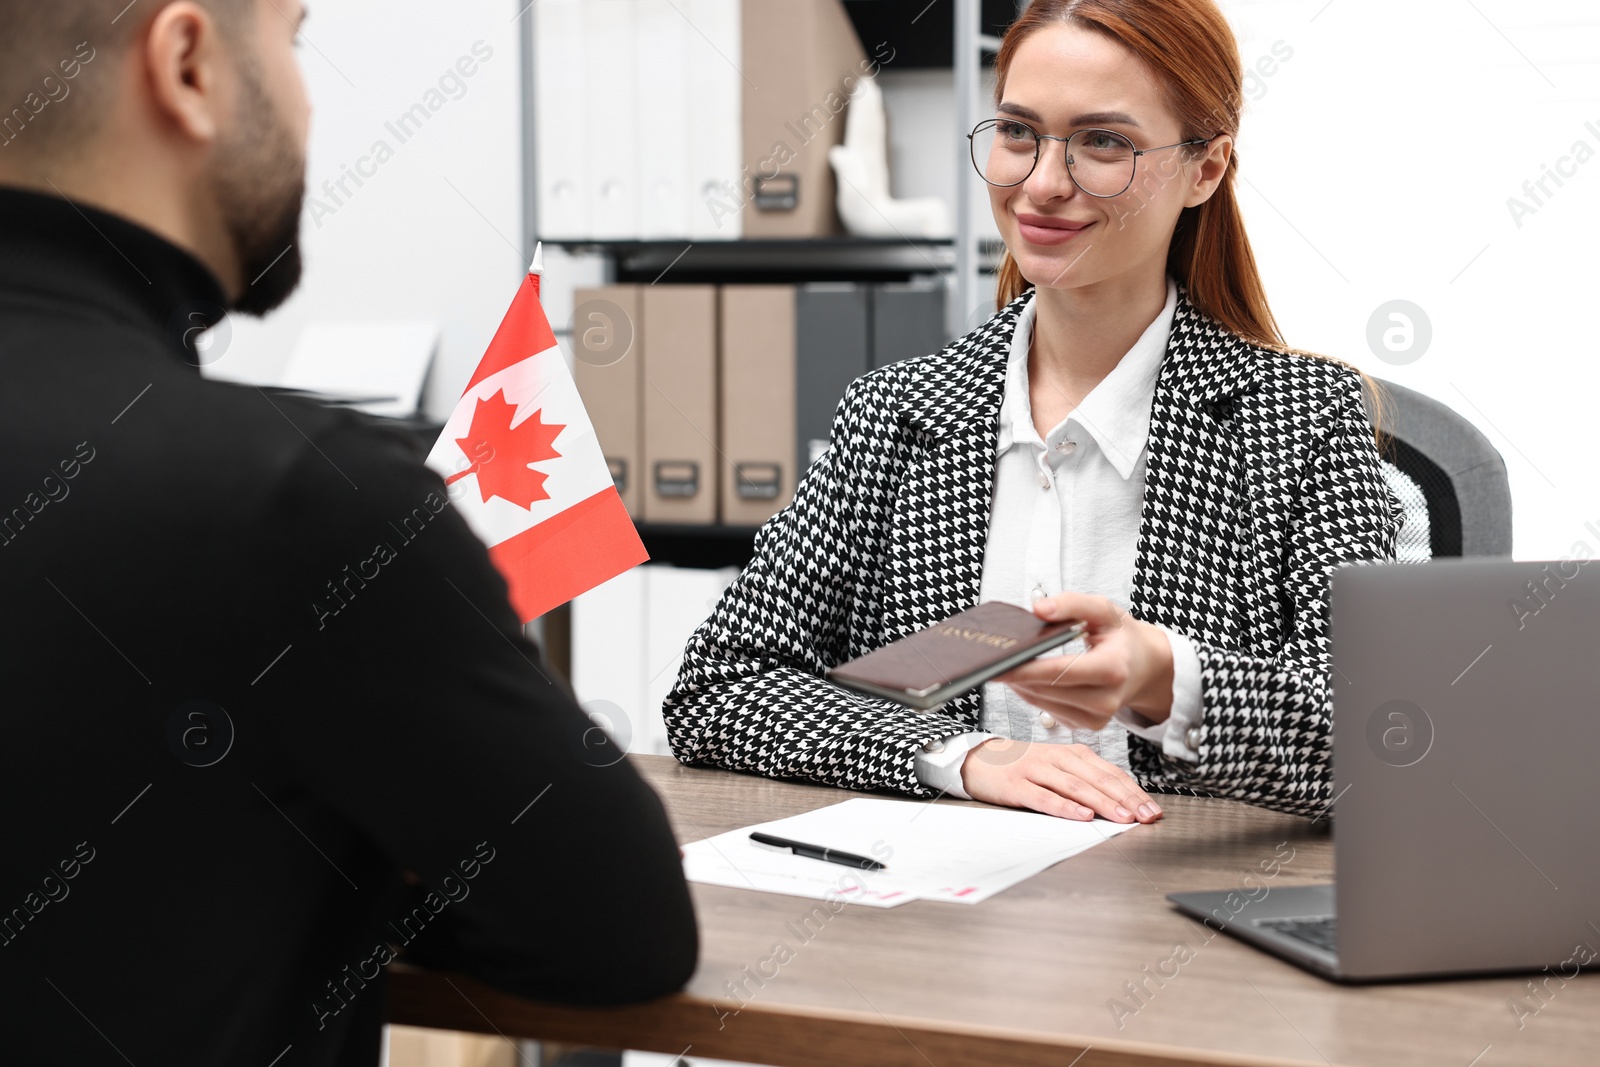 Photo of Immigration to Canada. Embassy worker giving passport to man in office